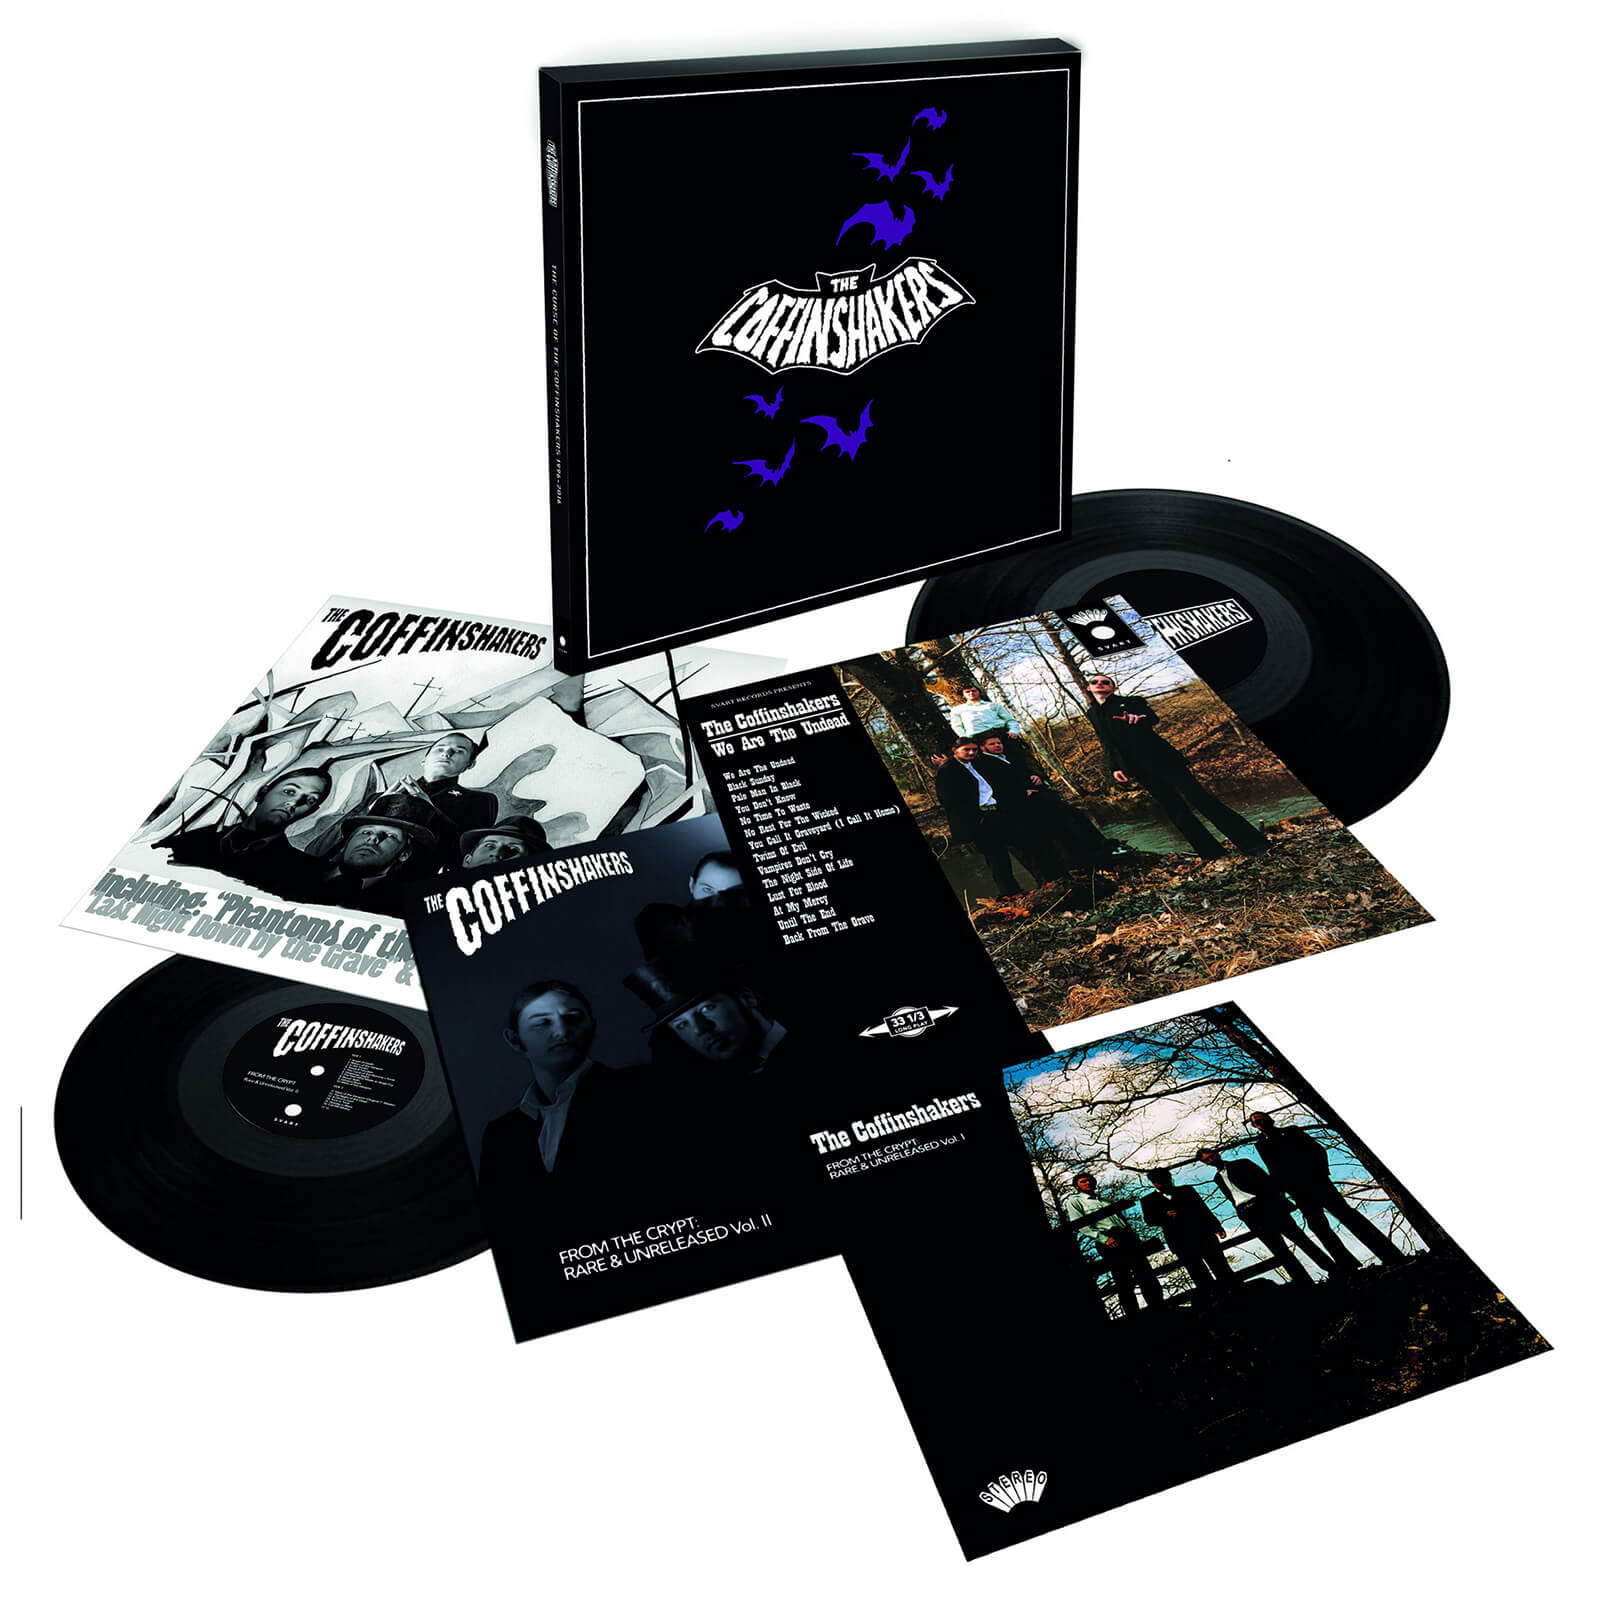 The Coffinshakers - The Curse Of The Coffinshakers Vinyl Box Set